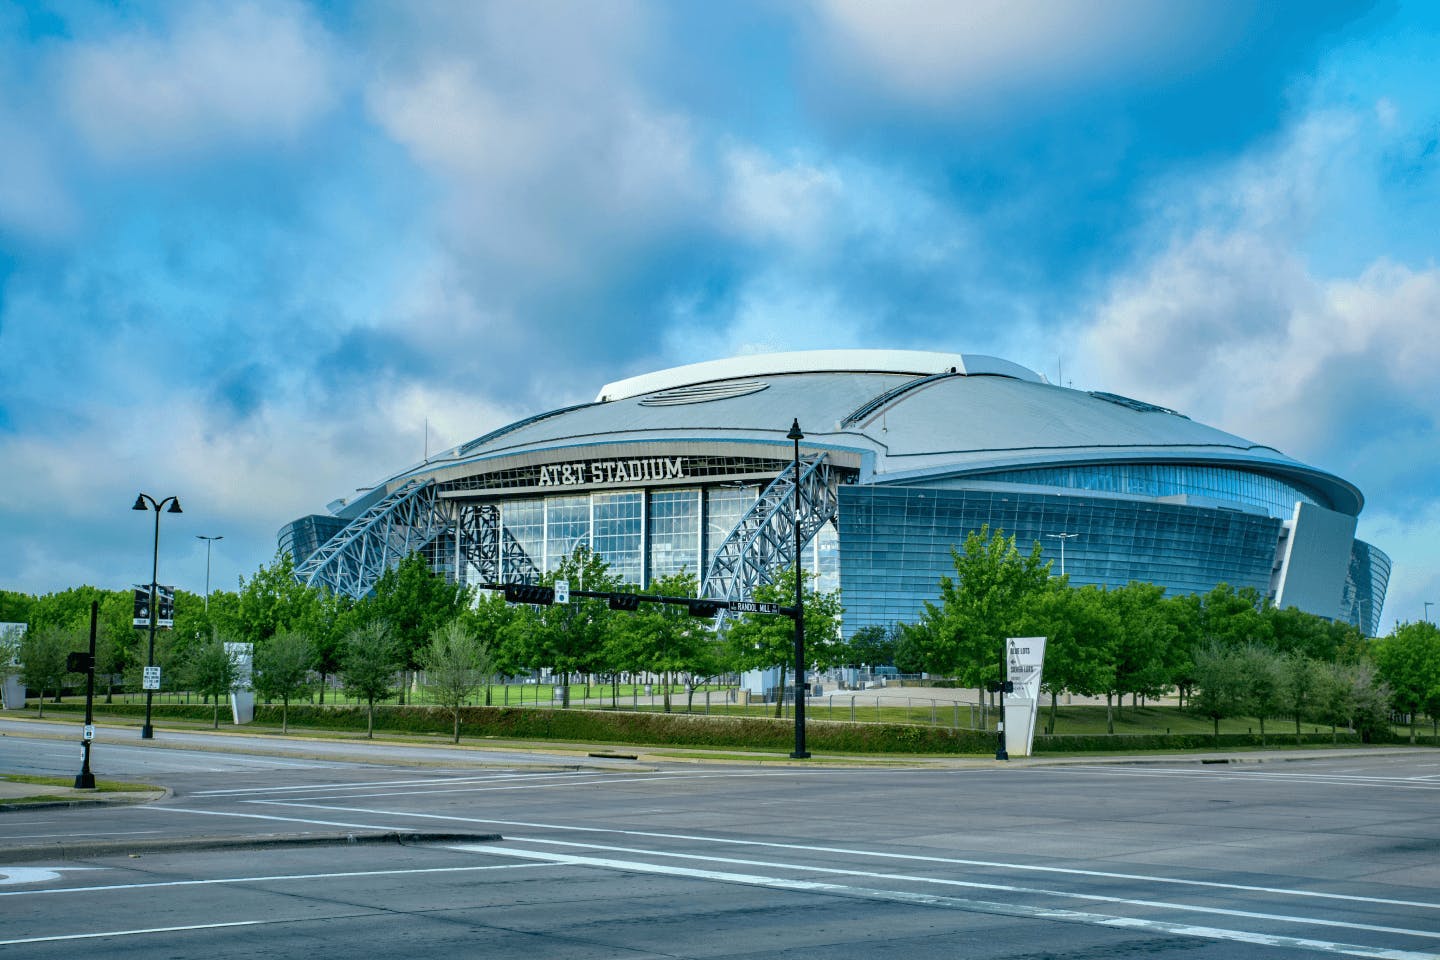 CarbonCure have produced enough low carbon concrete to fill the AT&T Stadium 13 times